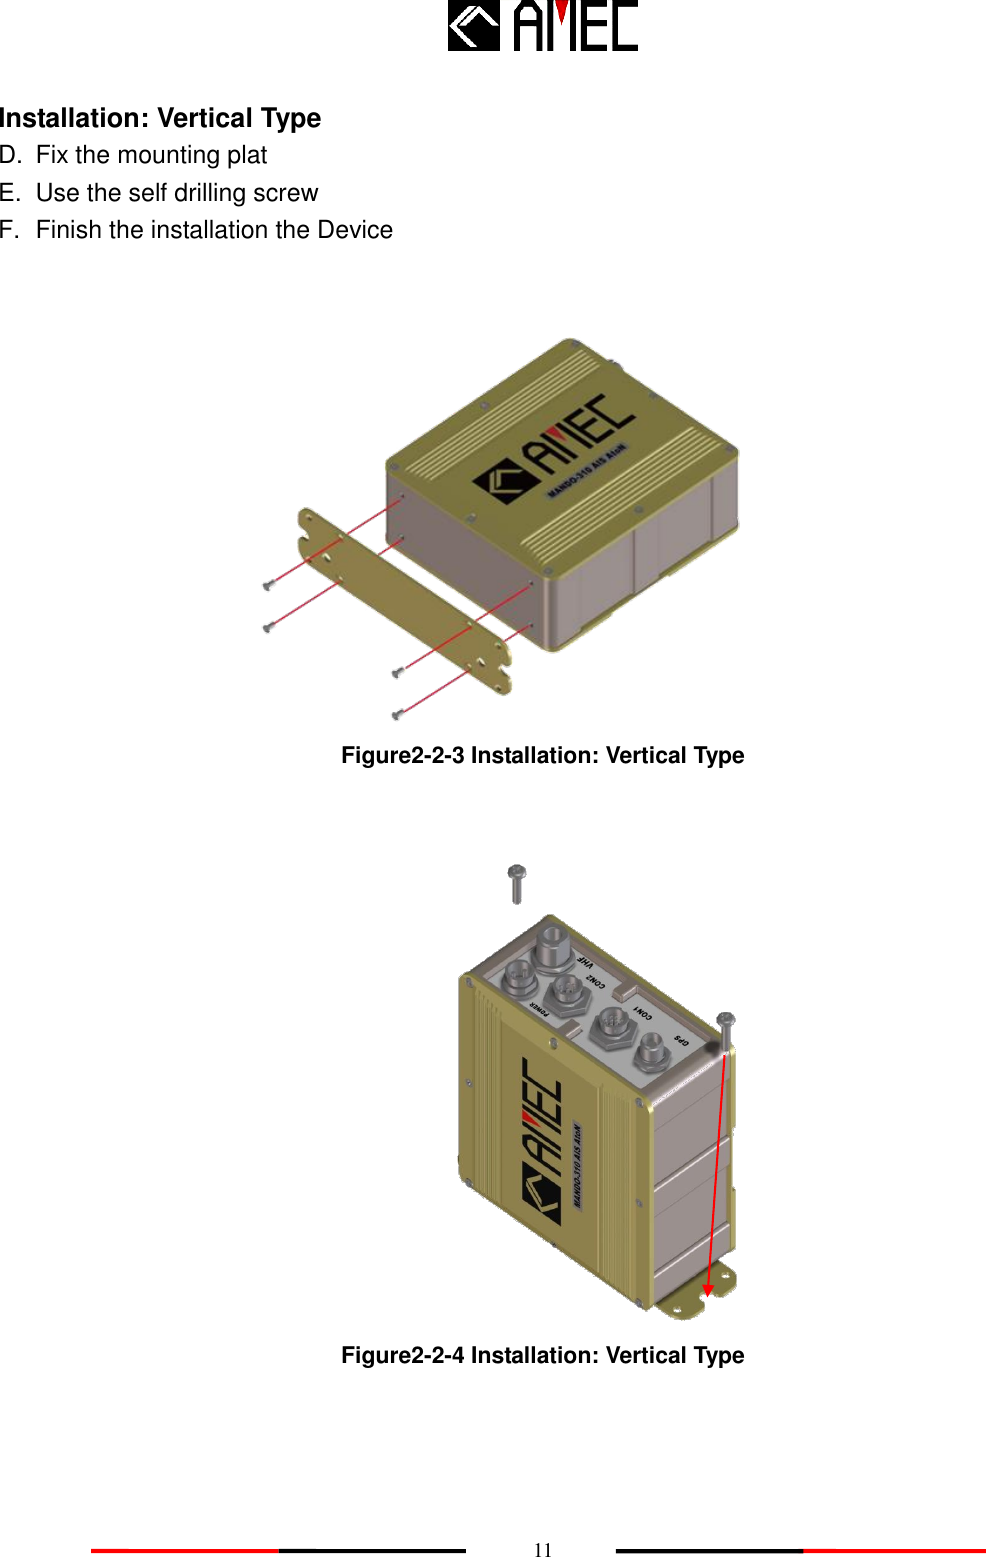    11 Installation: Vertical Type D.  Fix the mounting plat E.  Use the self drilling screw F.  Finish the installation the Device                        Figure2-2-3 Installation: Vertical Type                                   Figure2-2-4 Installation: Vertical Type 